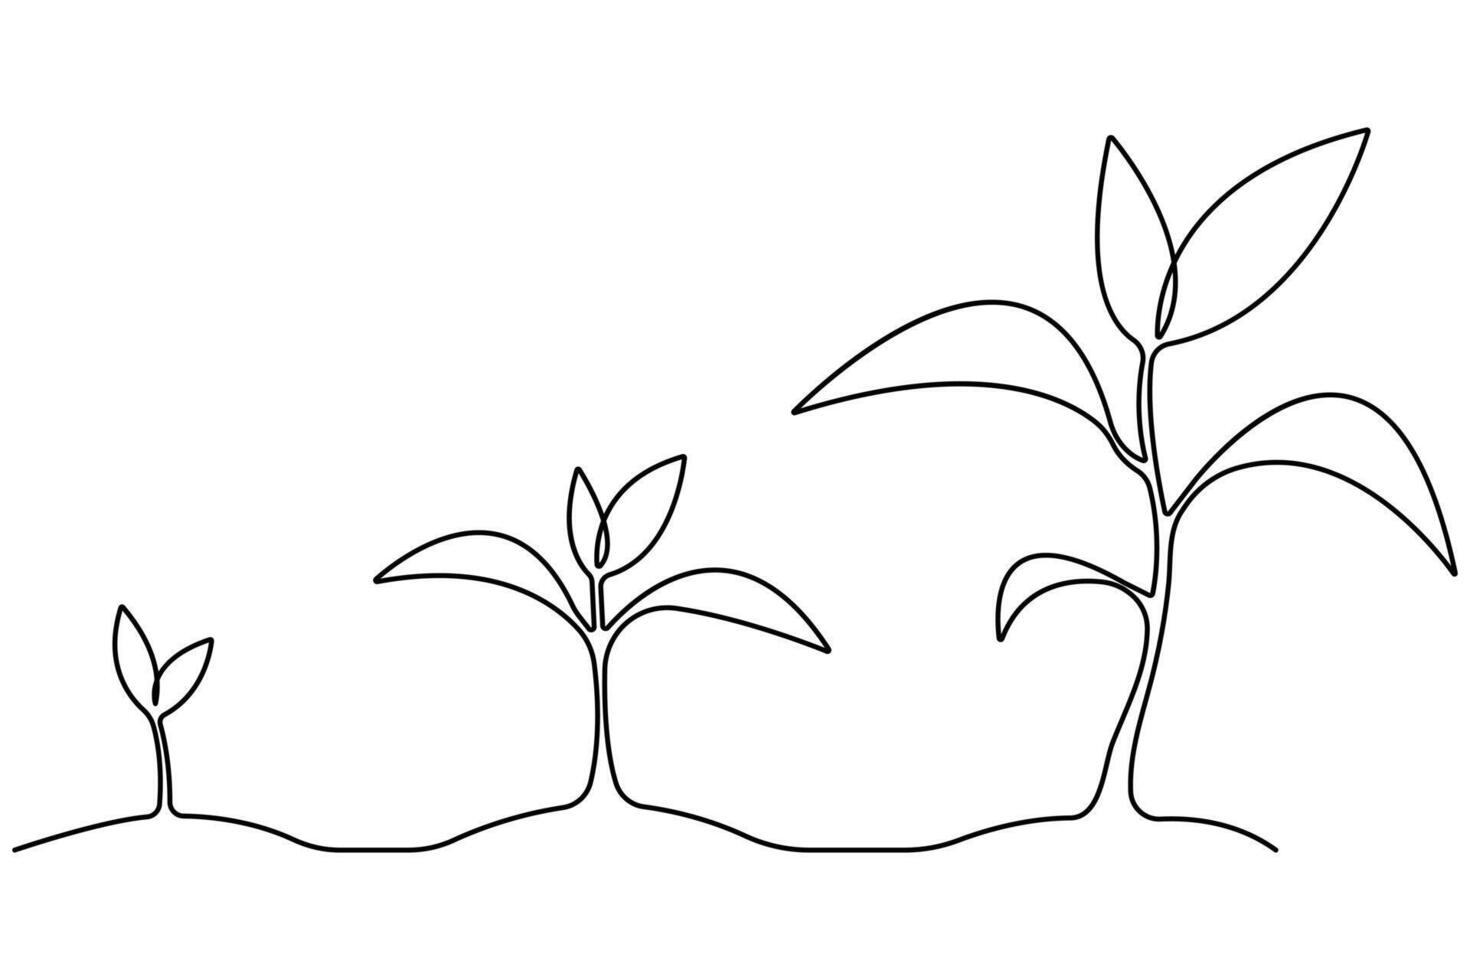 Plant growing continuous one line art drawing of tree plant outline vector illustration